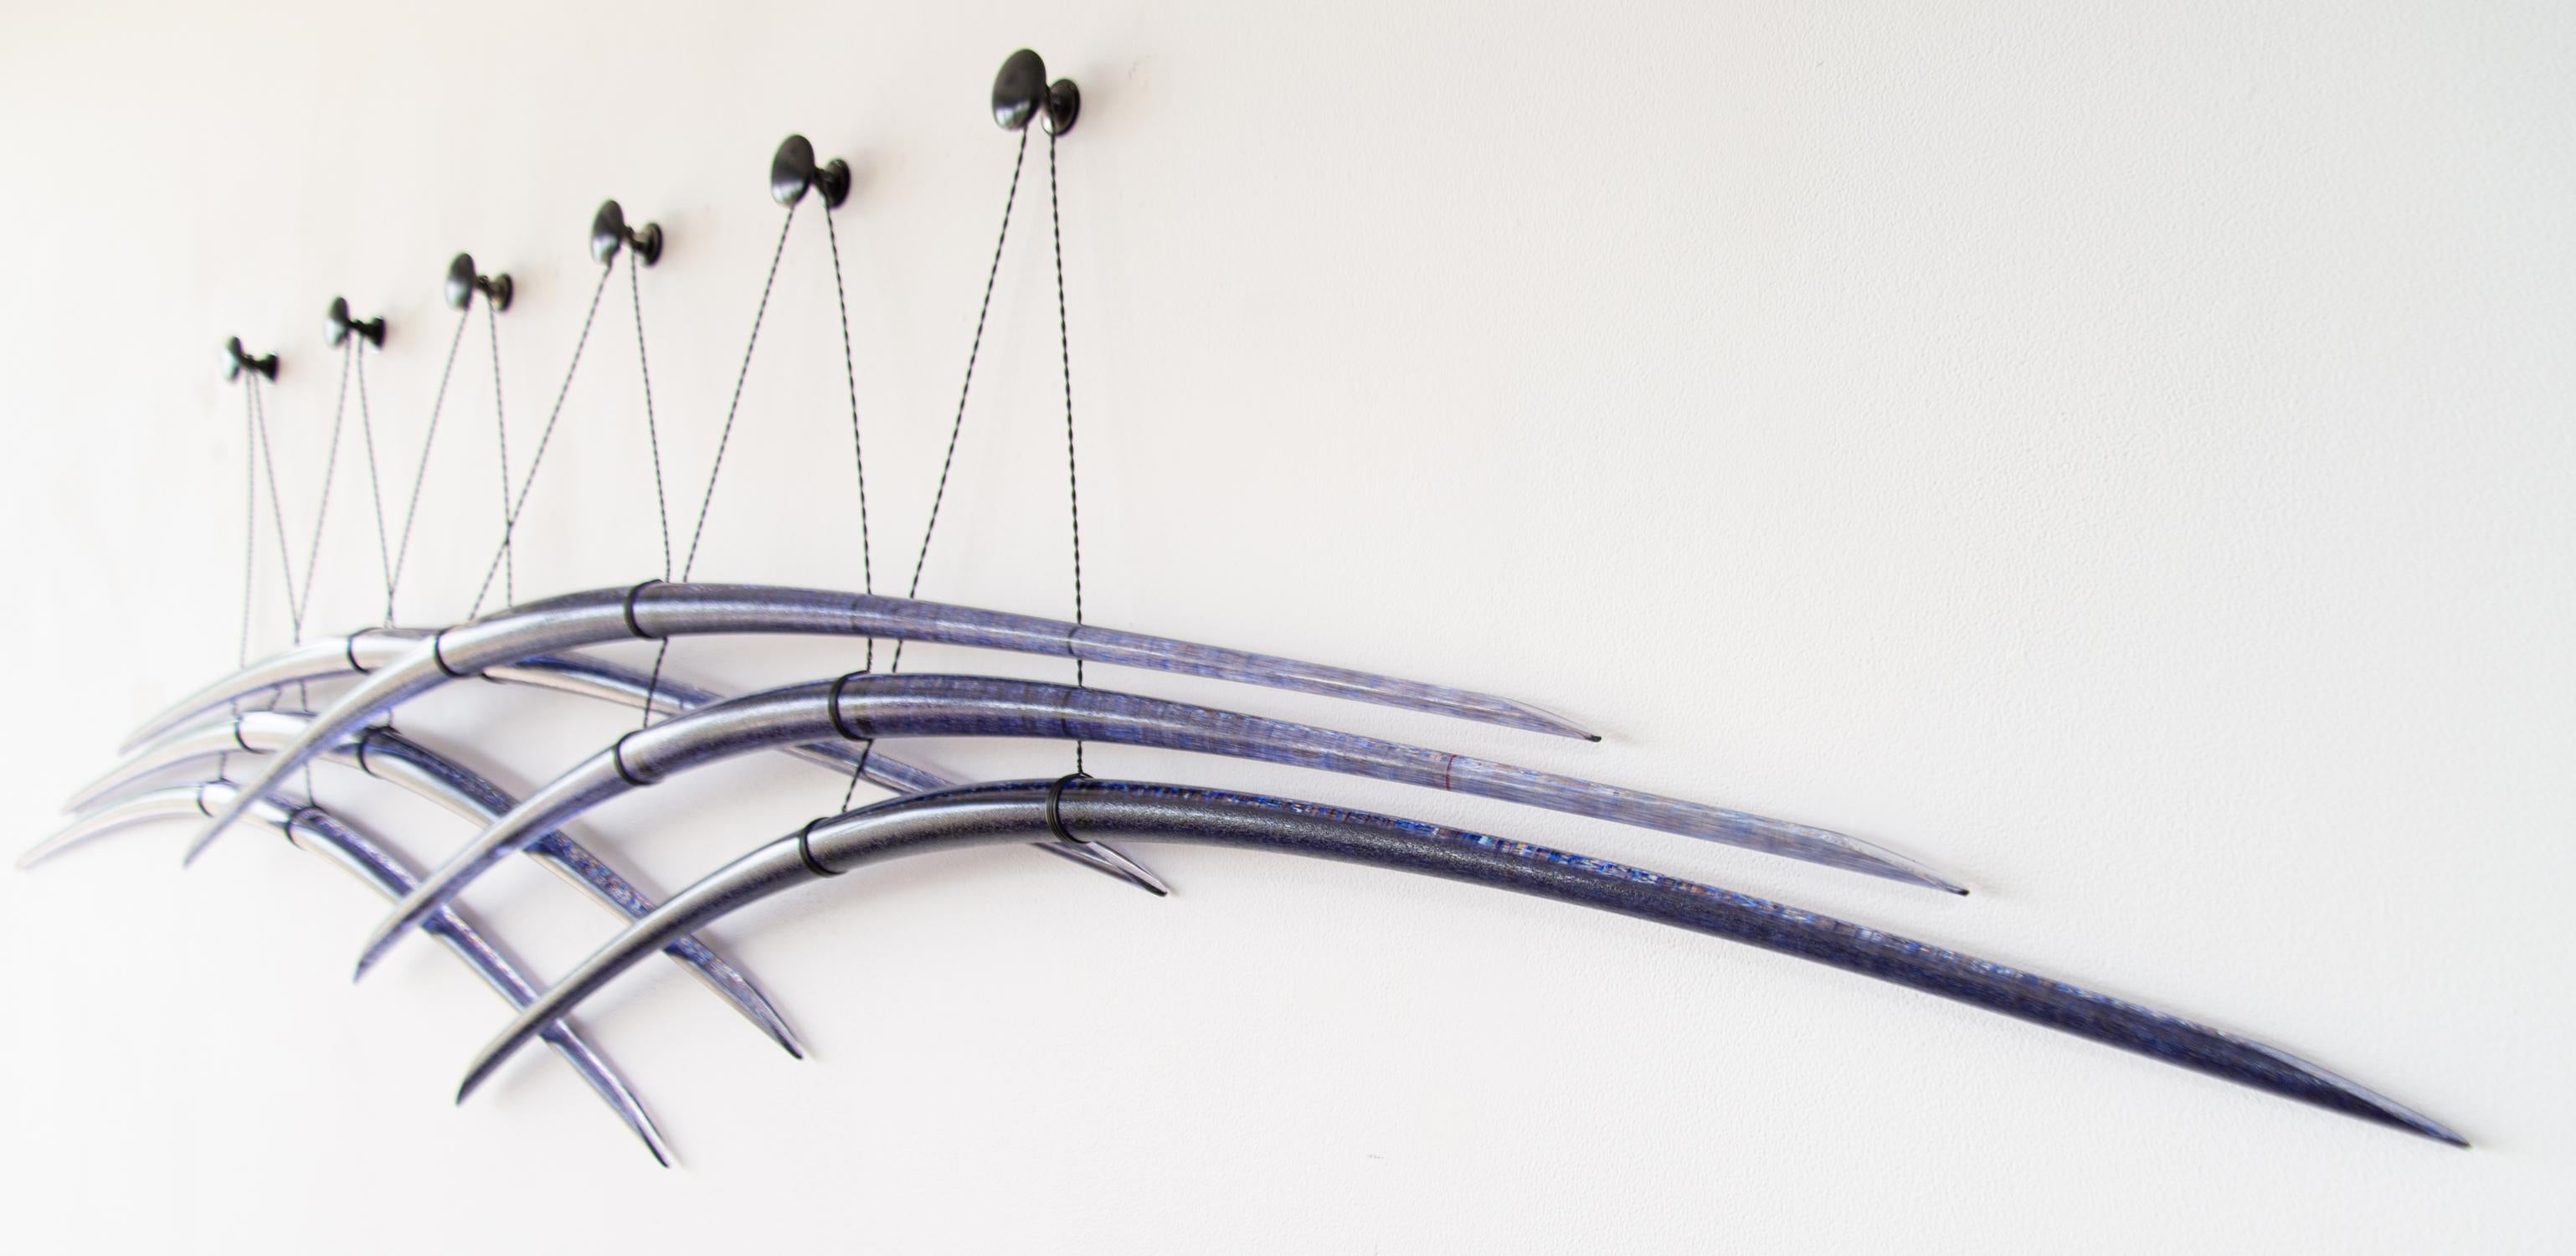 Canadian artist John Paul Robinson has chosen a deep blue for this elegant glass wall sculpture. Six arched pieces of translucent glass are suspended by fine steel cables…each crisscrossing the other in a graceful composition.
His glass work is